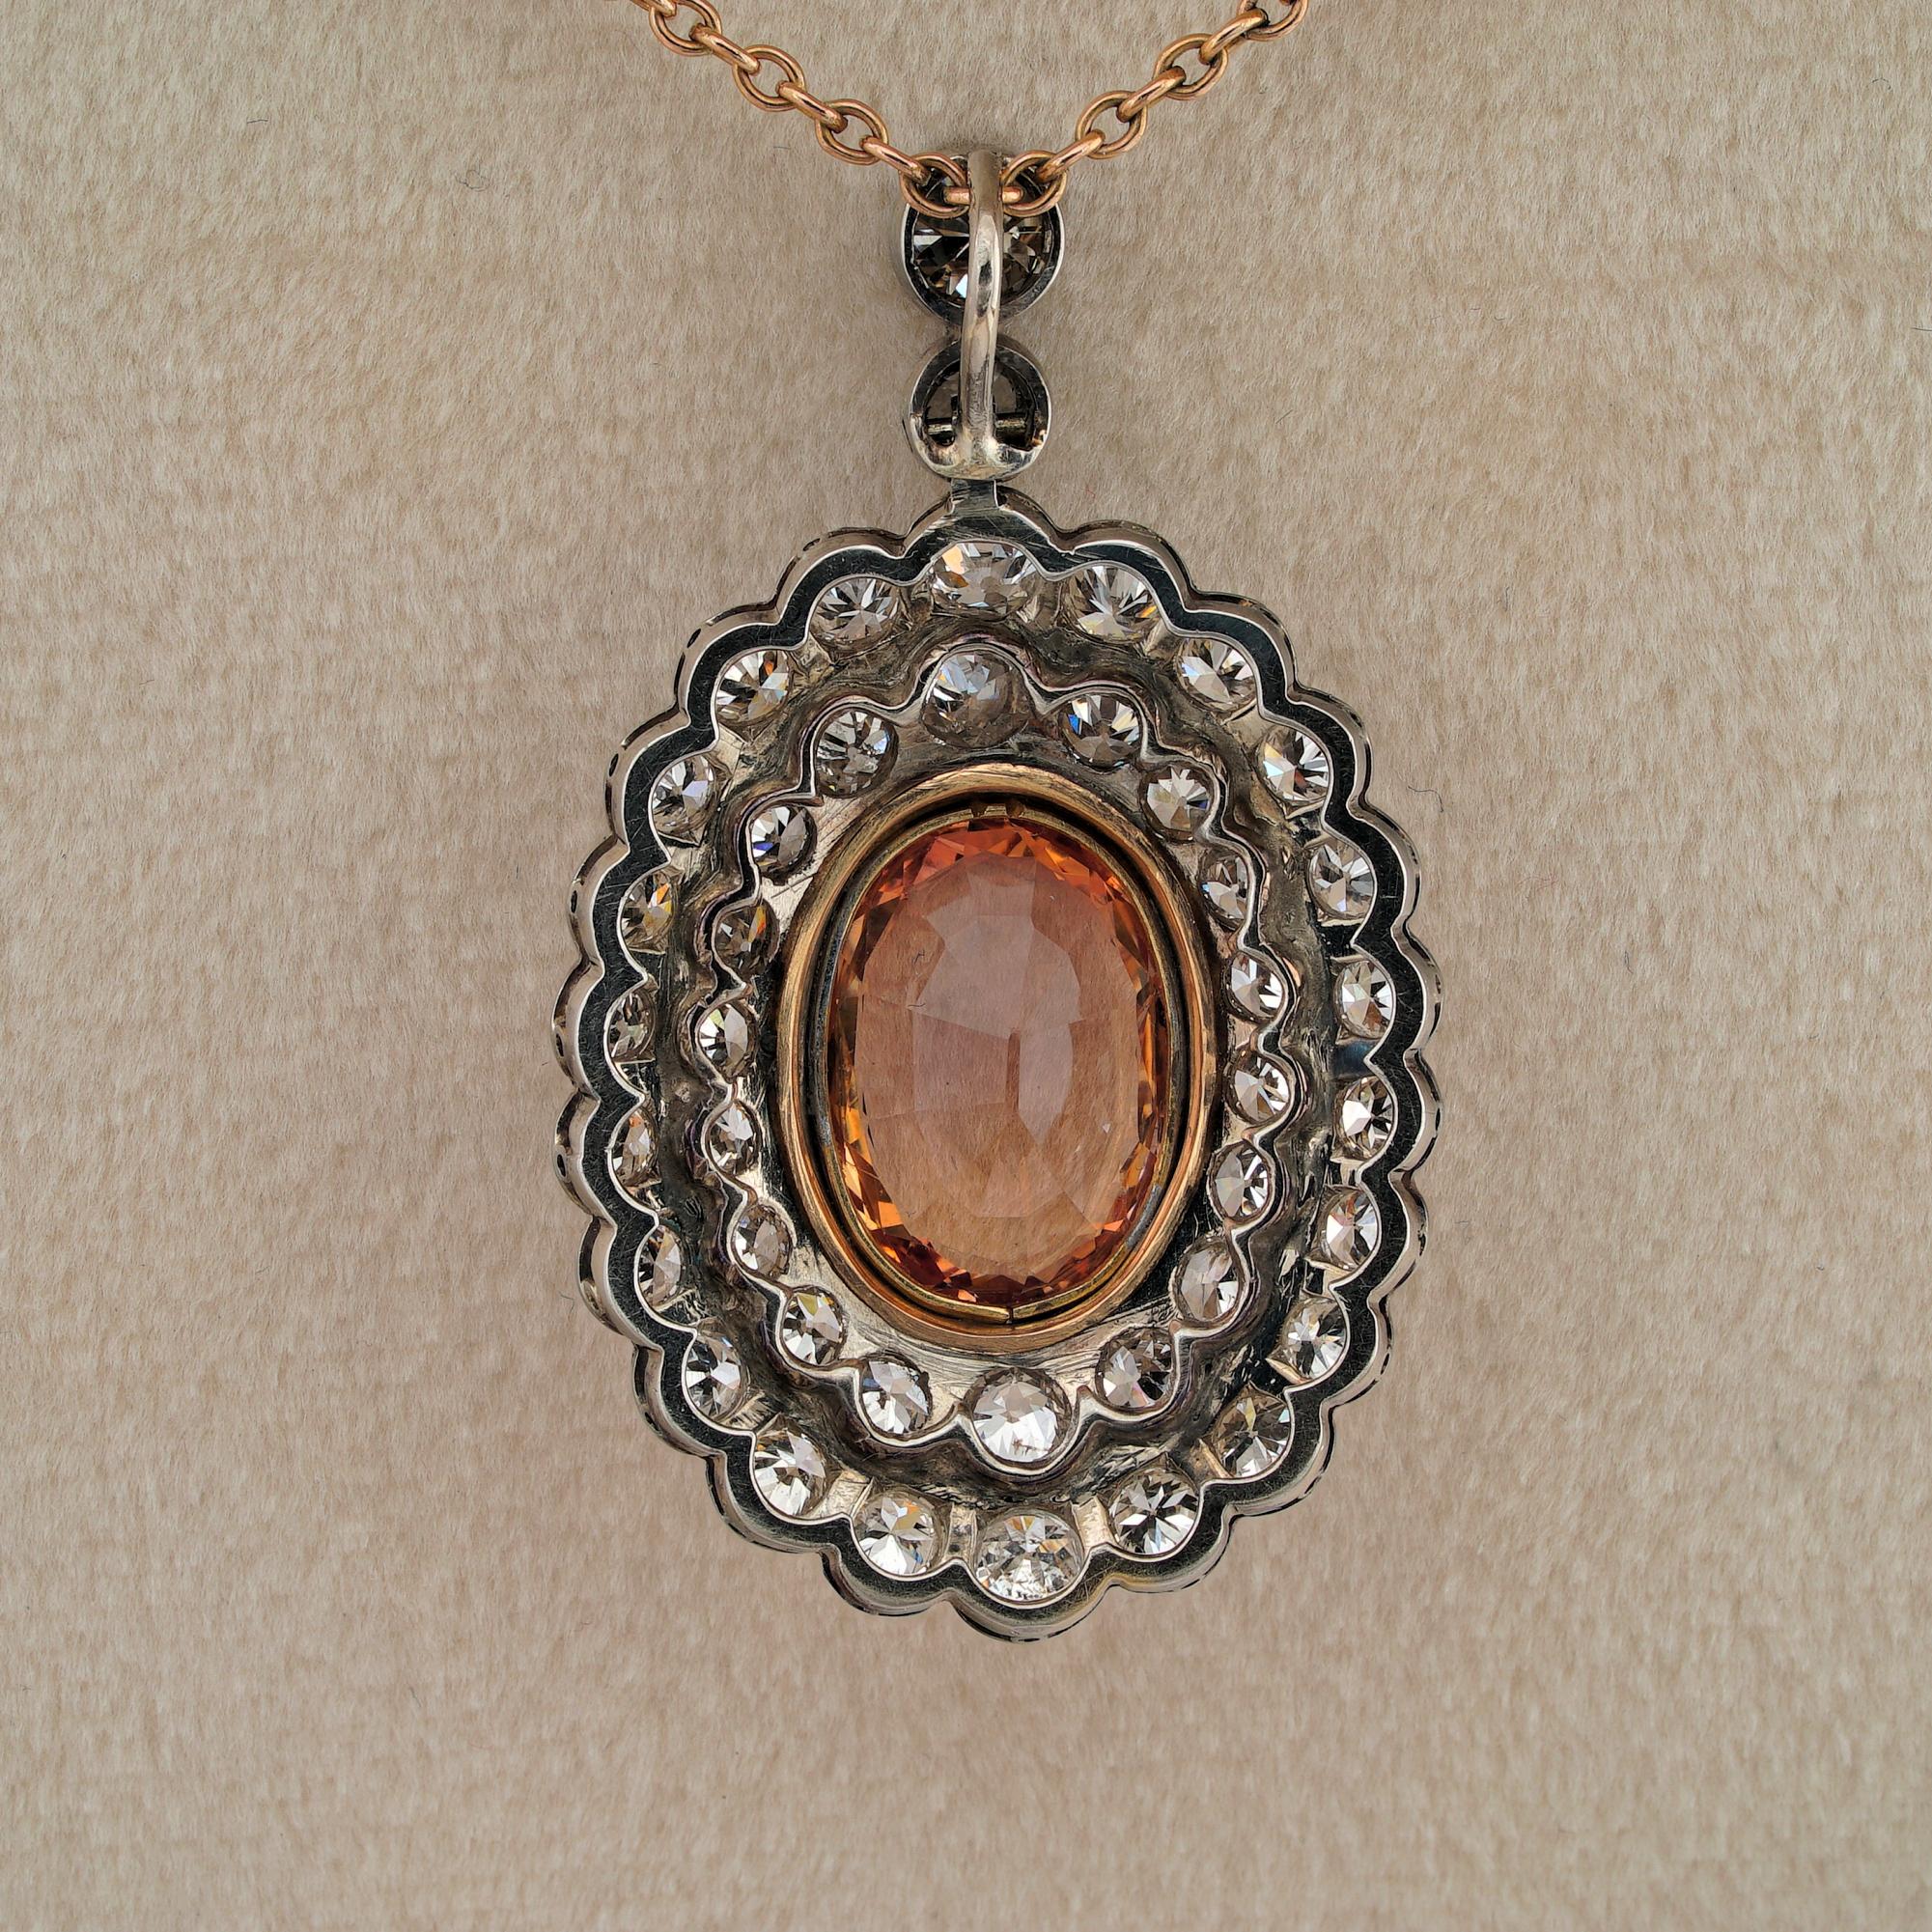 Victorian/Edwardian Imperial Topaz Diamond Pendant/Necklace 1900 ca. In Good Condition For Sale In Napoli, IT